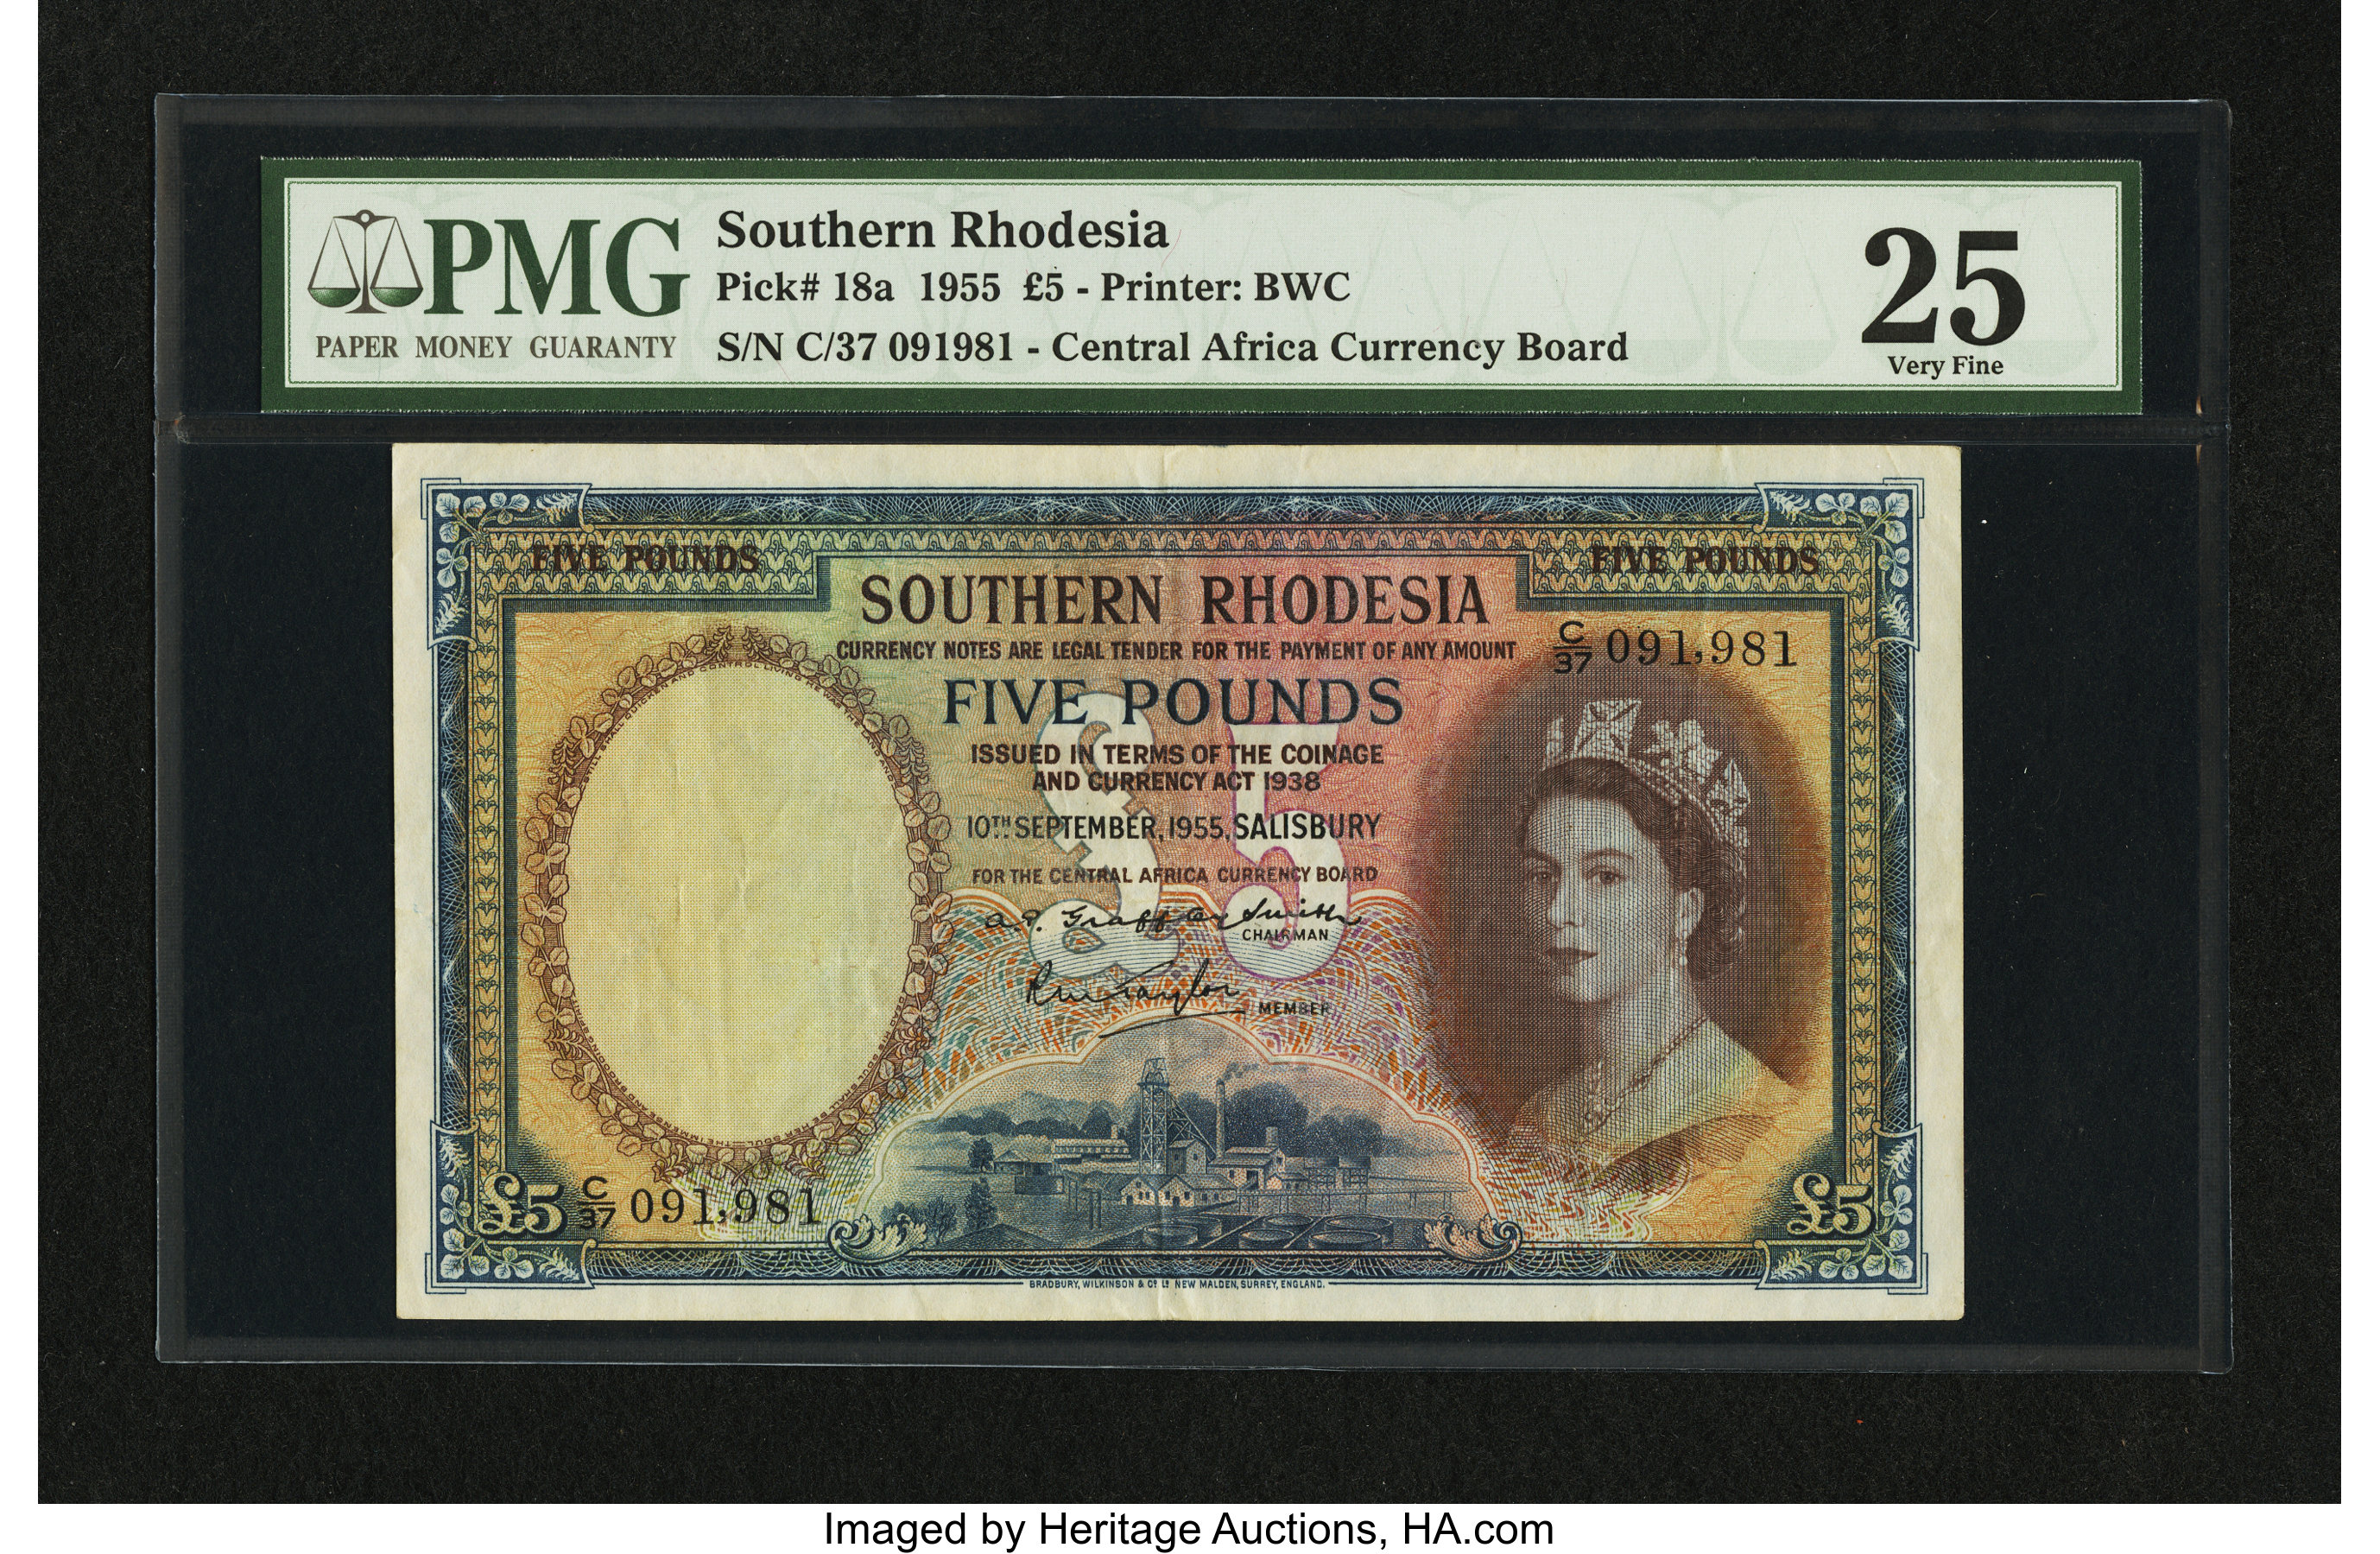 Southern Rhodesia Bank Note, Central Africa Currency Board, 5 